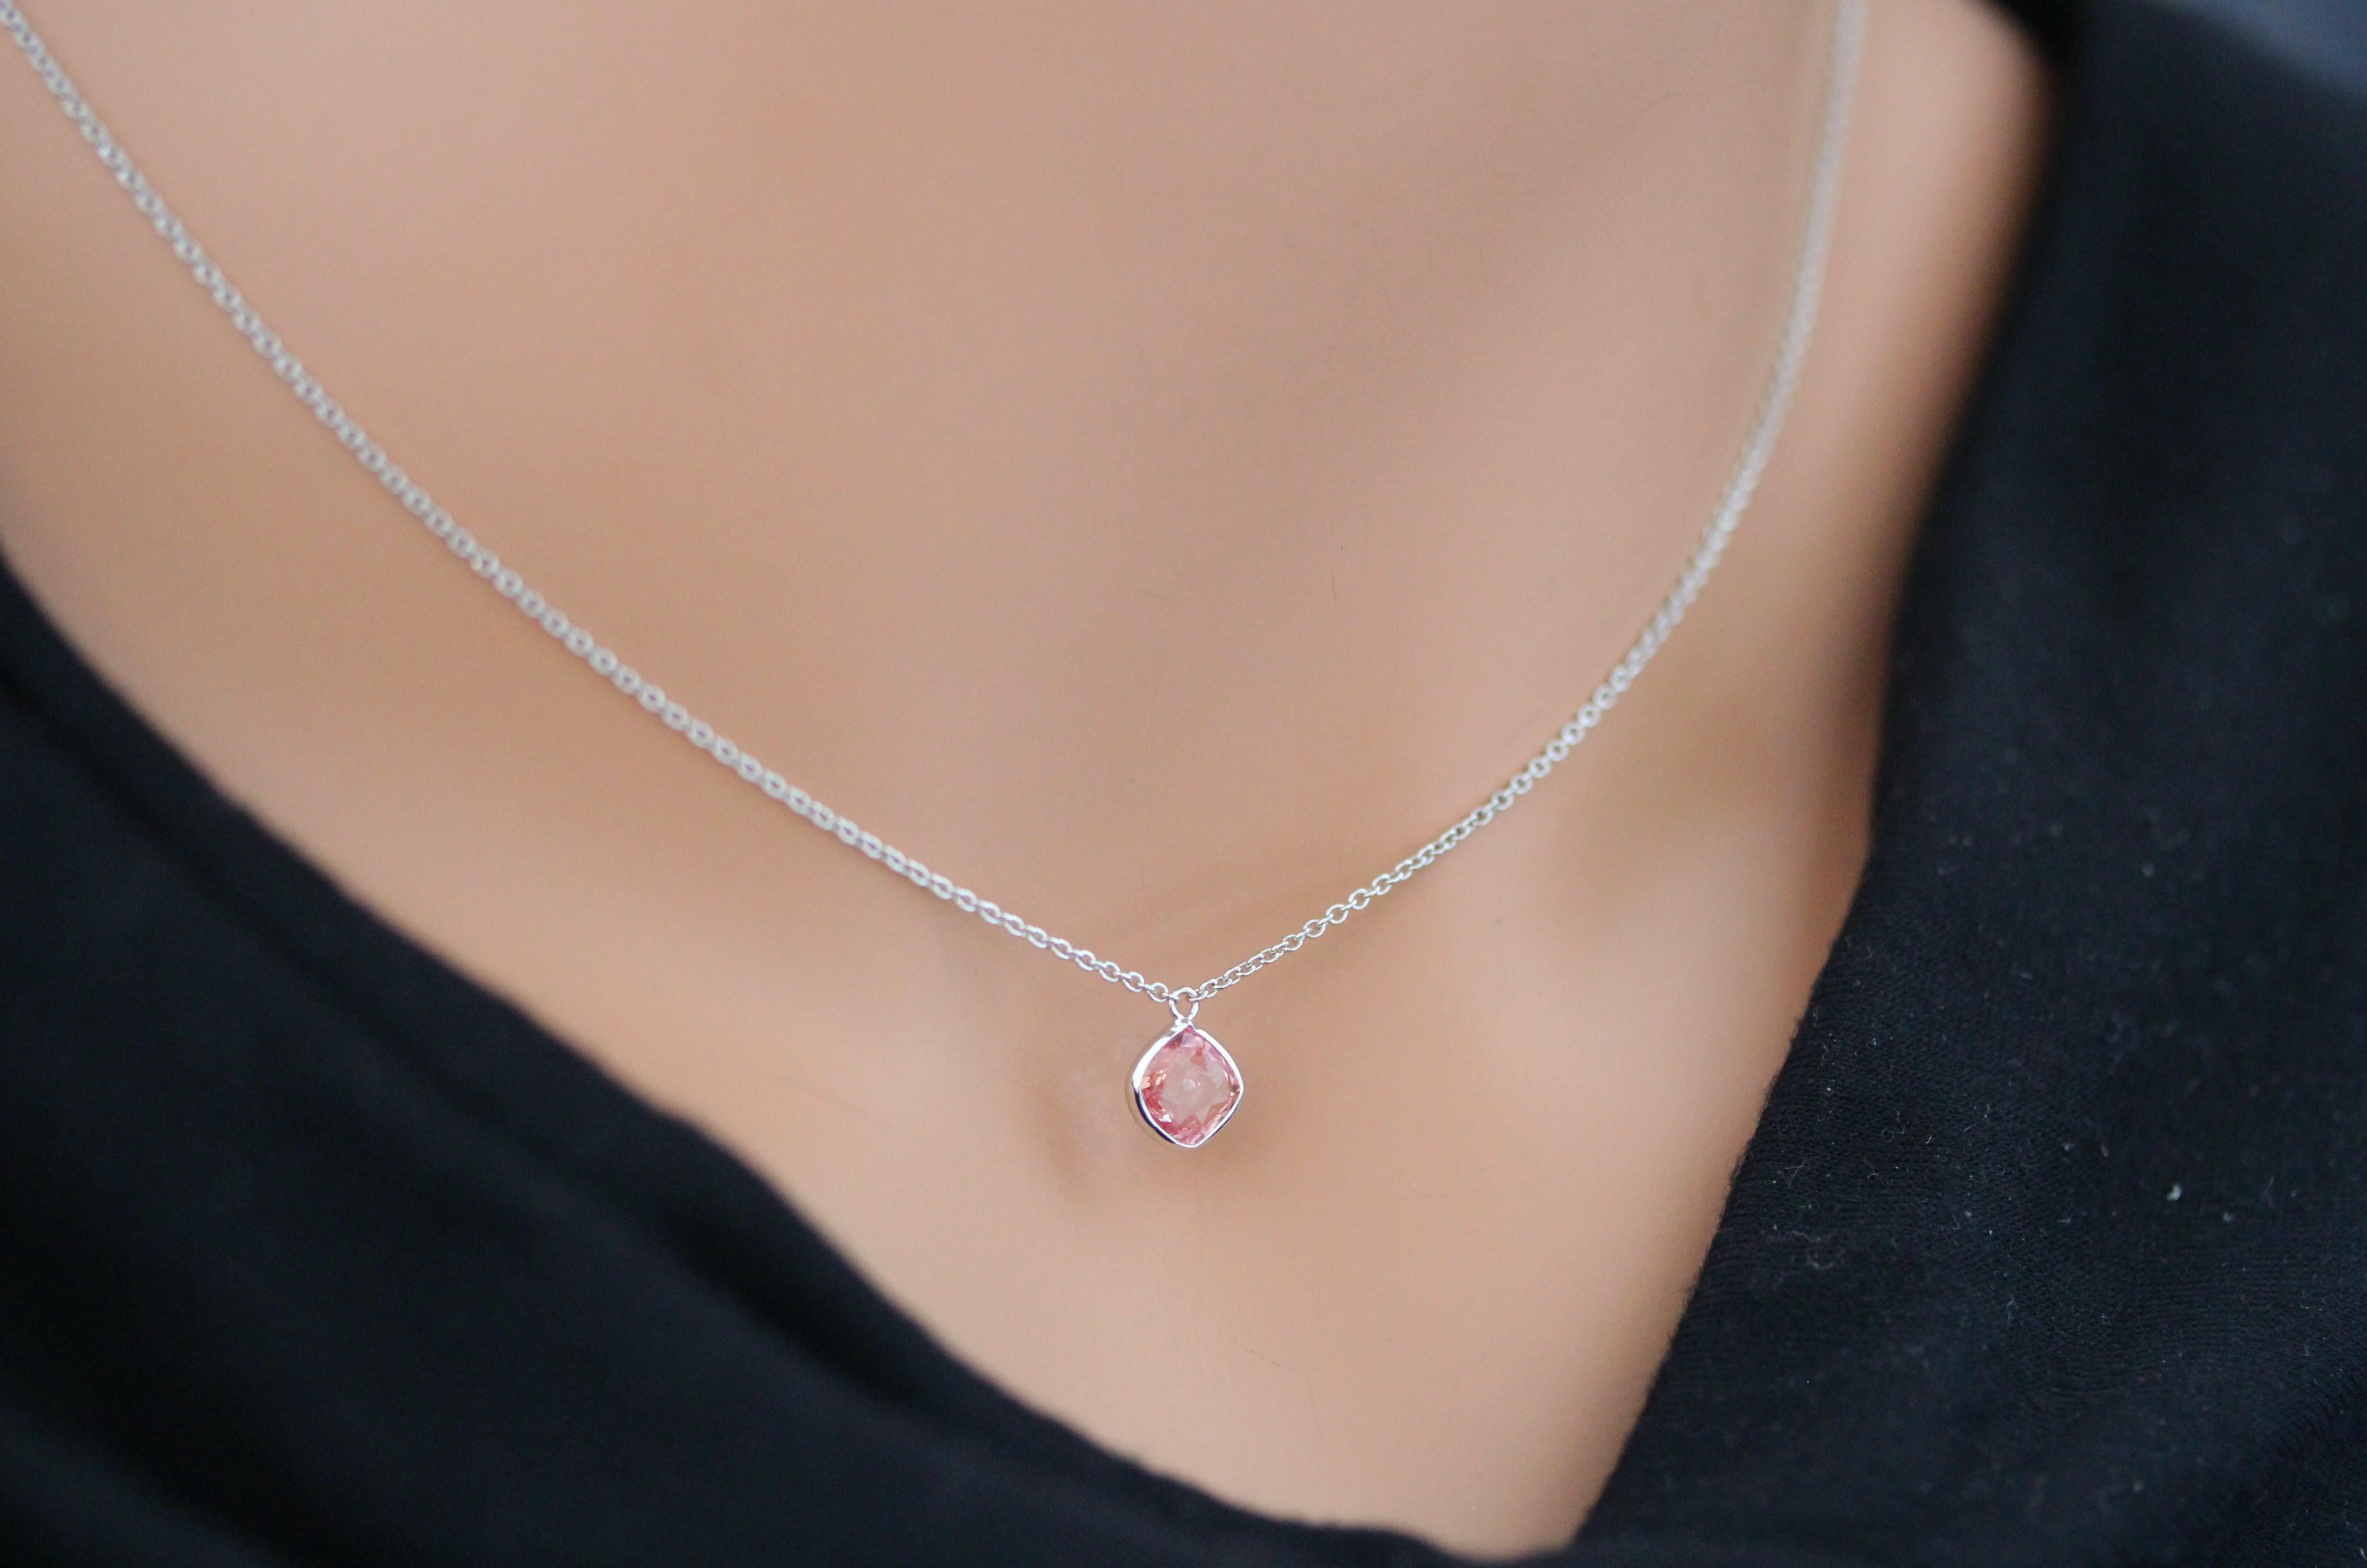 Cushion Cut 1.39 Carat Cushion Padparadschah Pink Fashion Necklaces In 14k White Gold For Sale